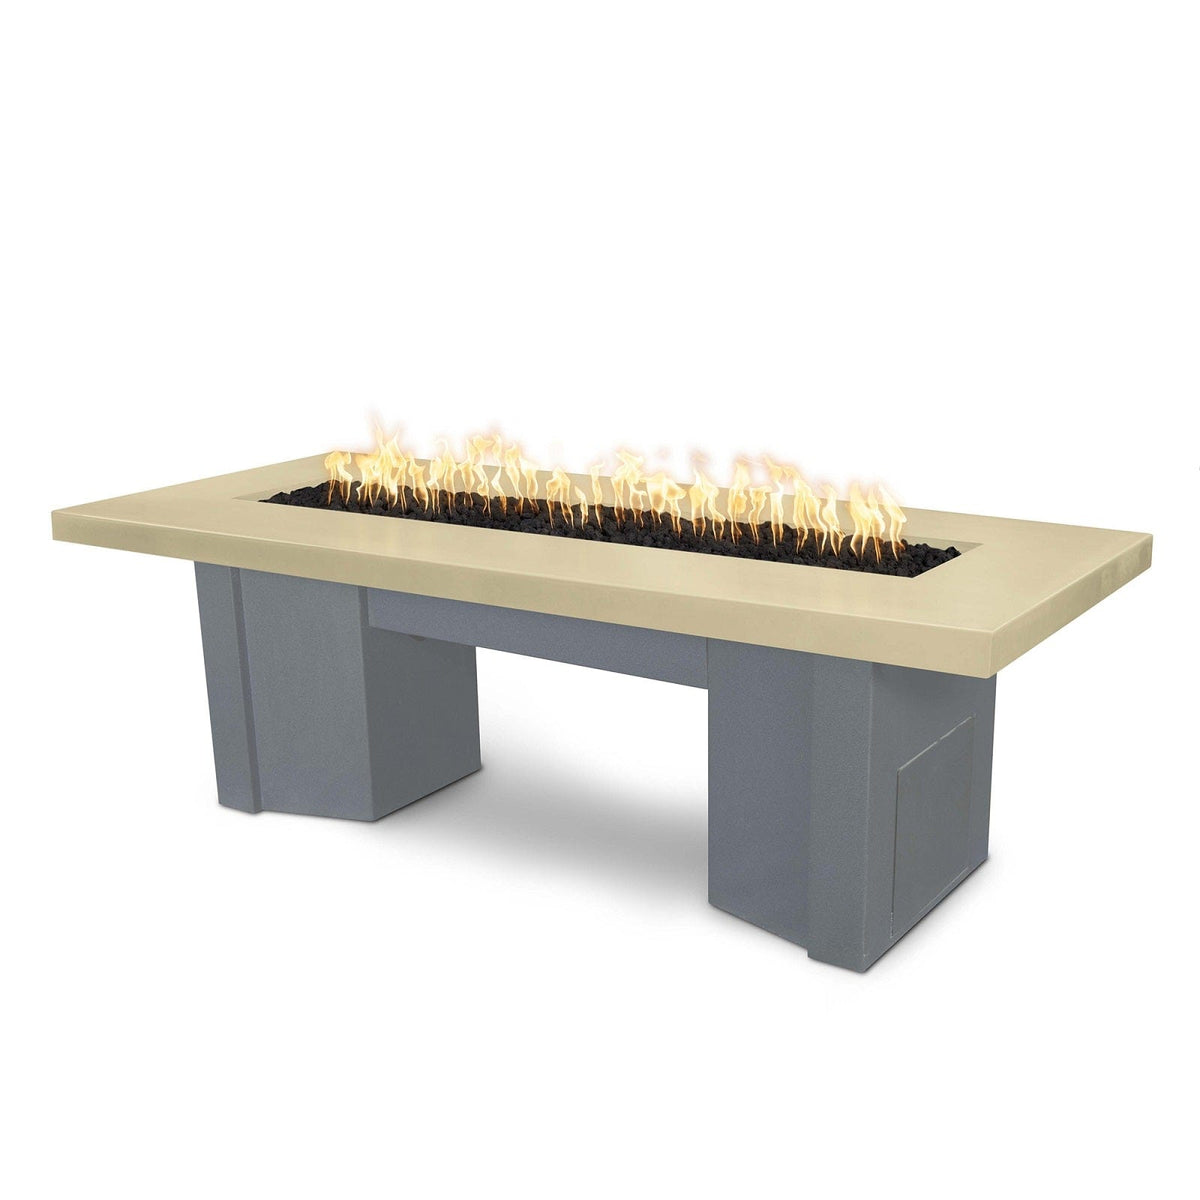 The Outdoor Plus Fire Features Vanilla (-VAN) / Gray Powder Coated Steel (-GRY) The Outdoor Plus 60&quot; Alameda Fire Table Smooth Concrete in Liquid Propane - Flame Sense System with Push Button Spark Igniter / OPT-ALMGFRC60FSEN-LP